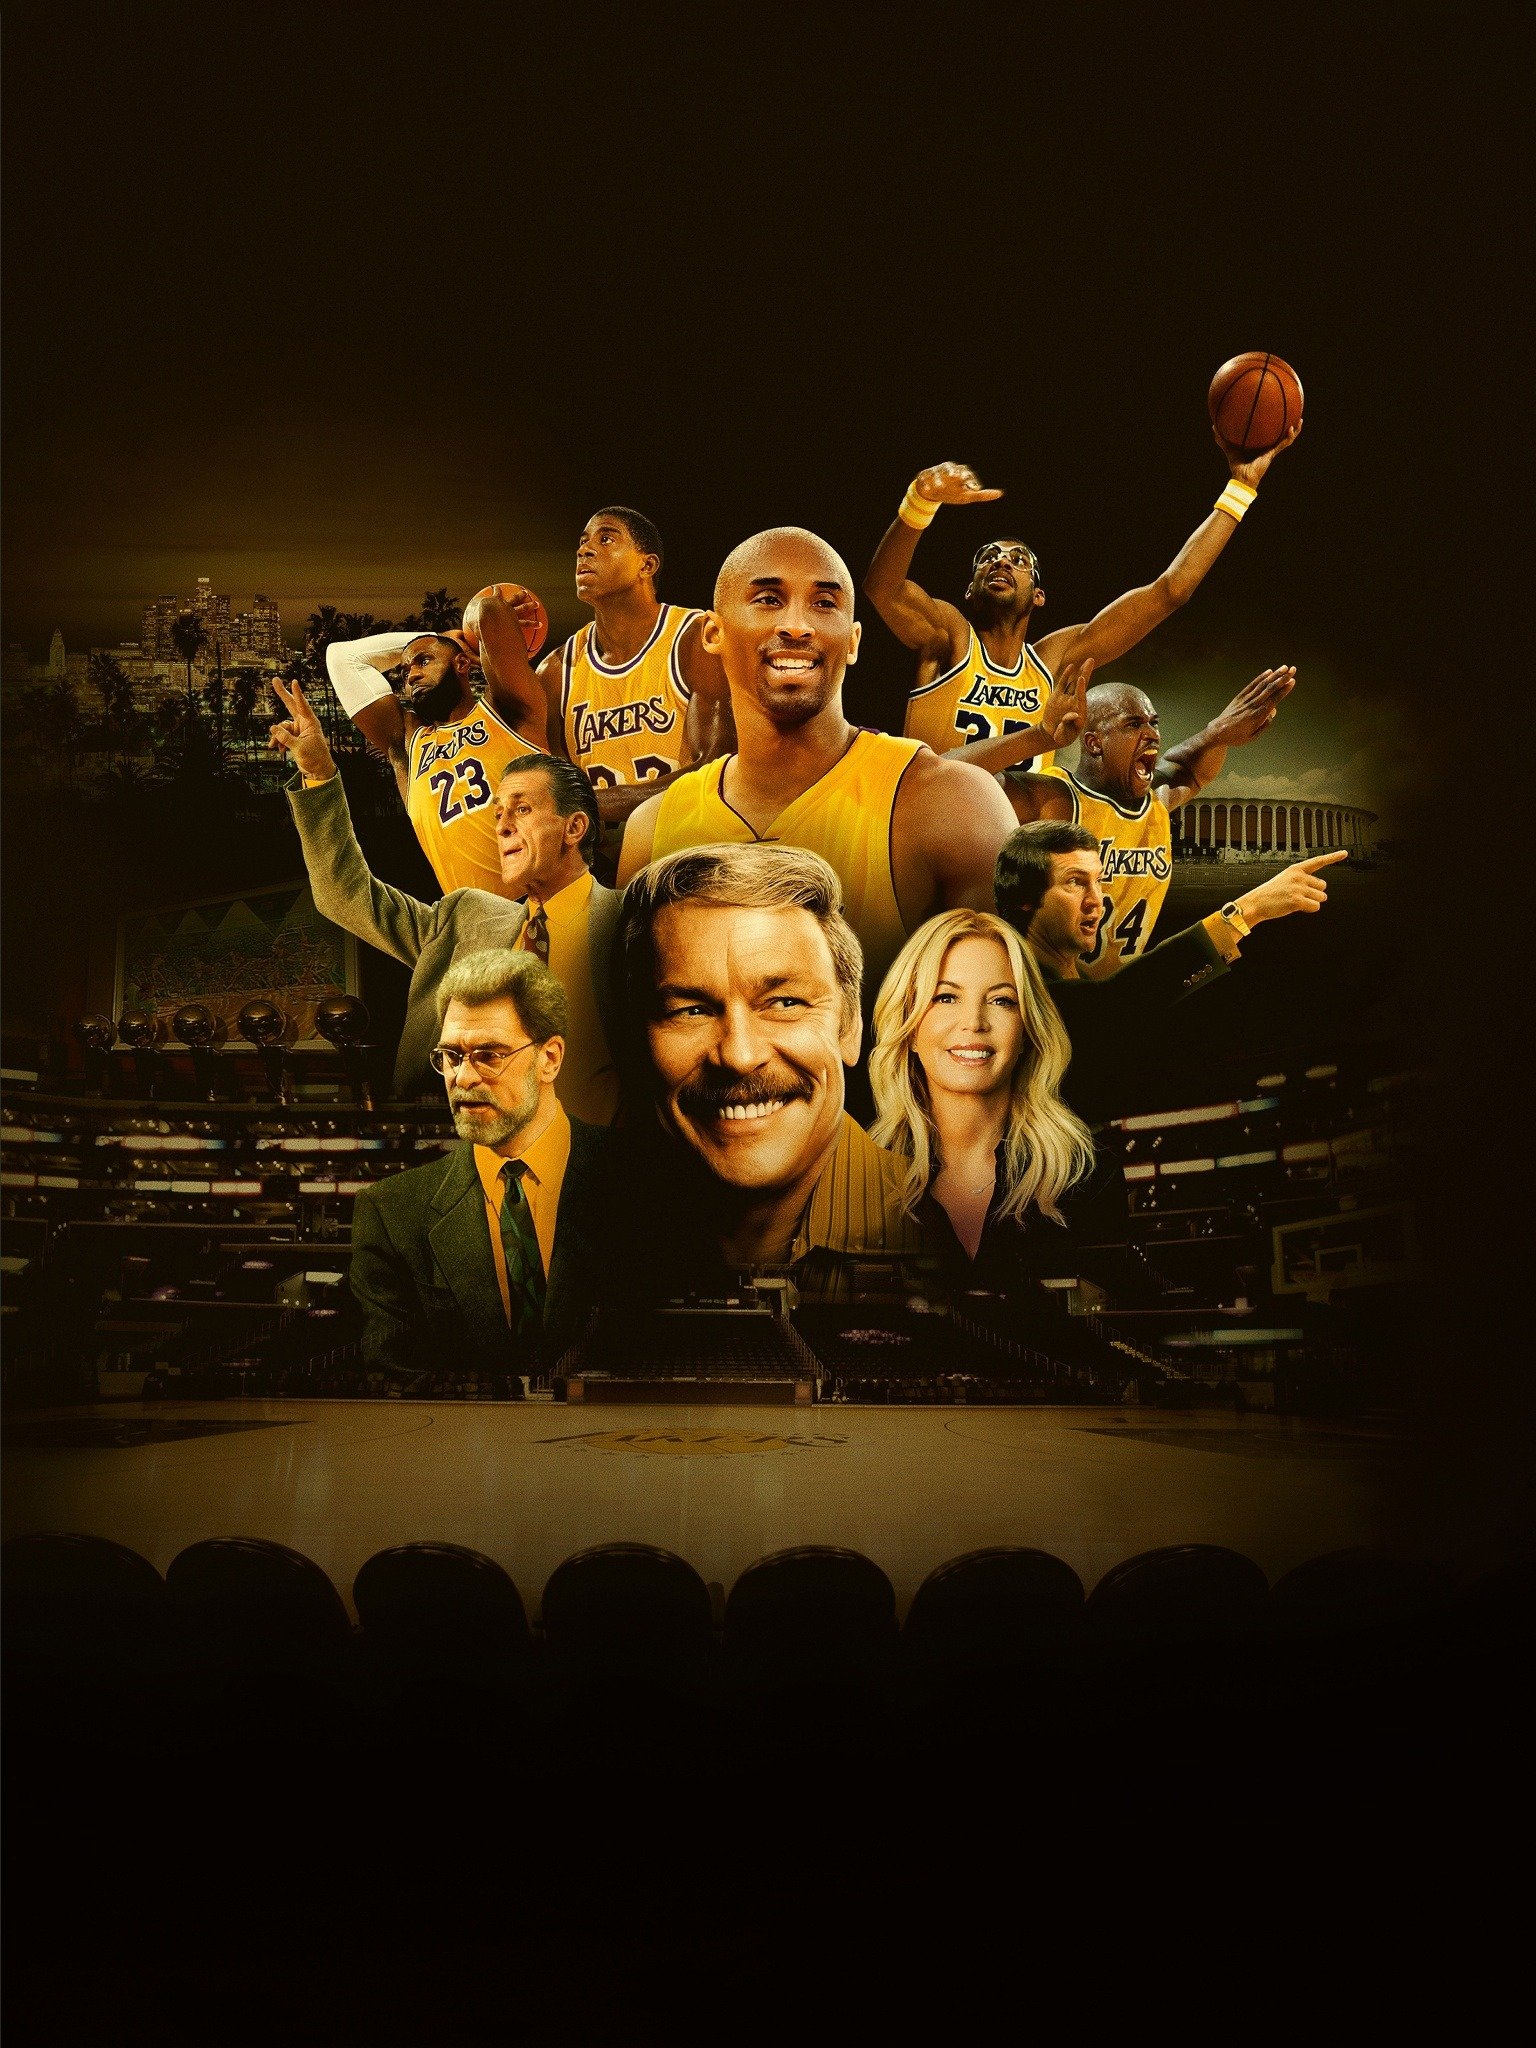 Legacy The True Story of the LA Lakers